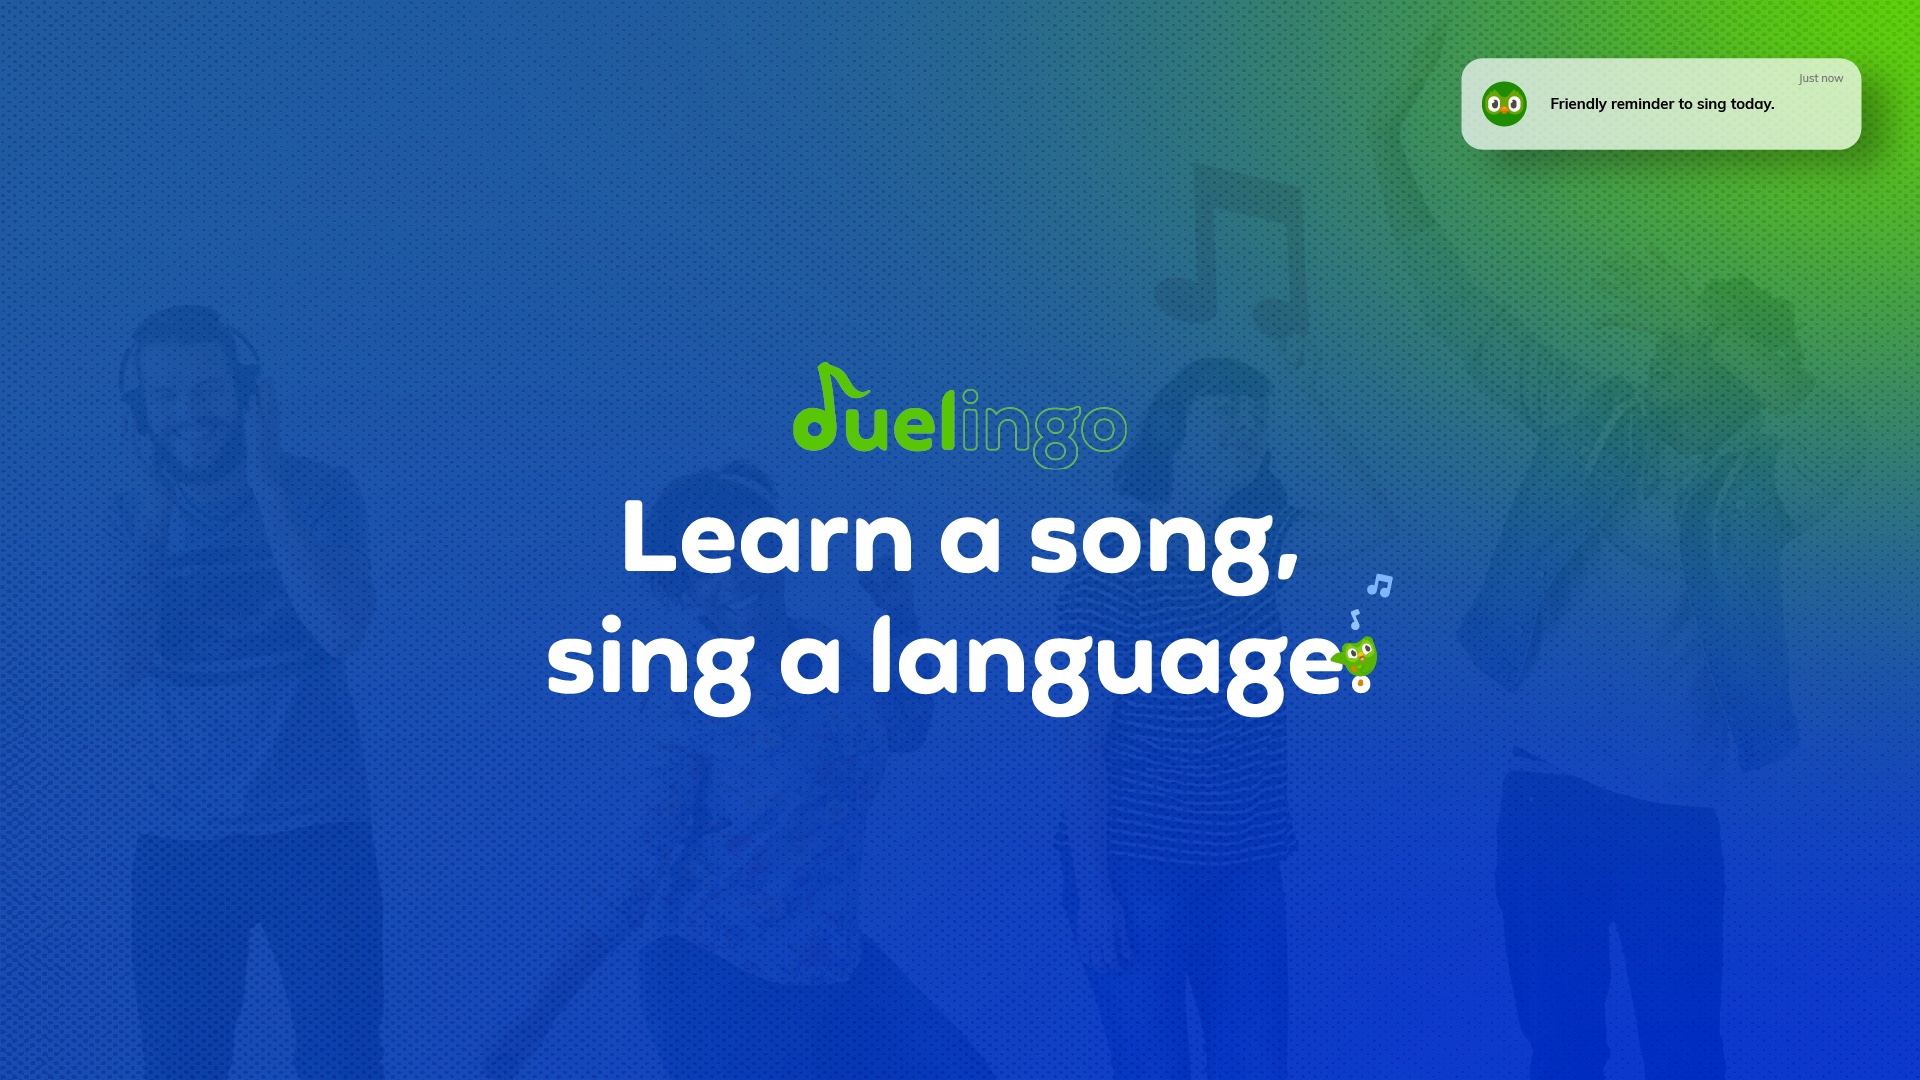 Vega Awards - #duelingo - Learn a song, sing a language!